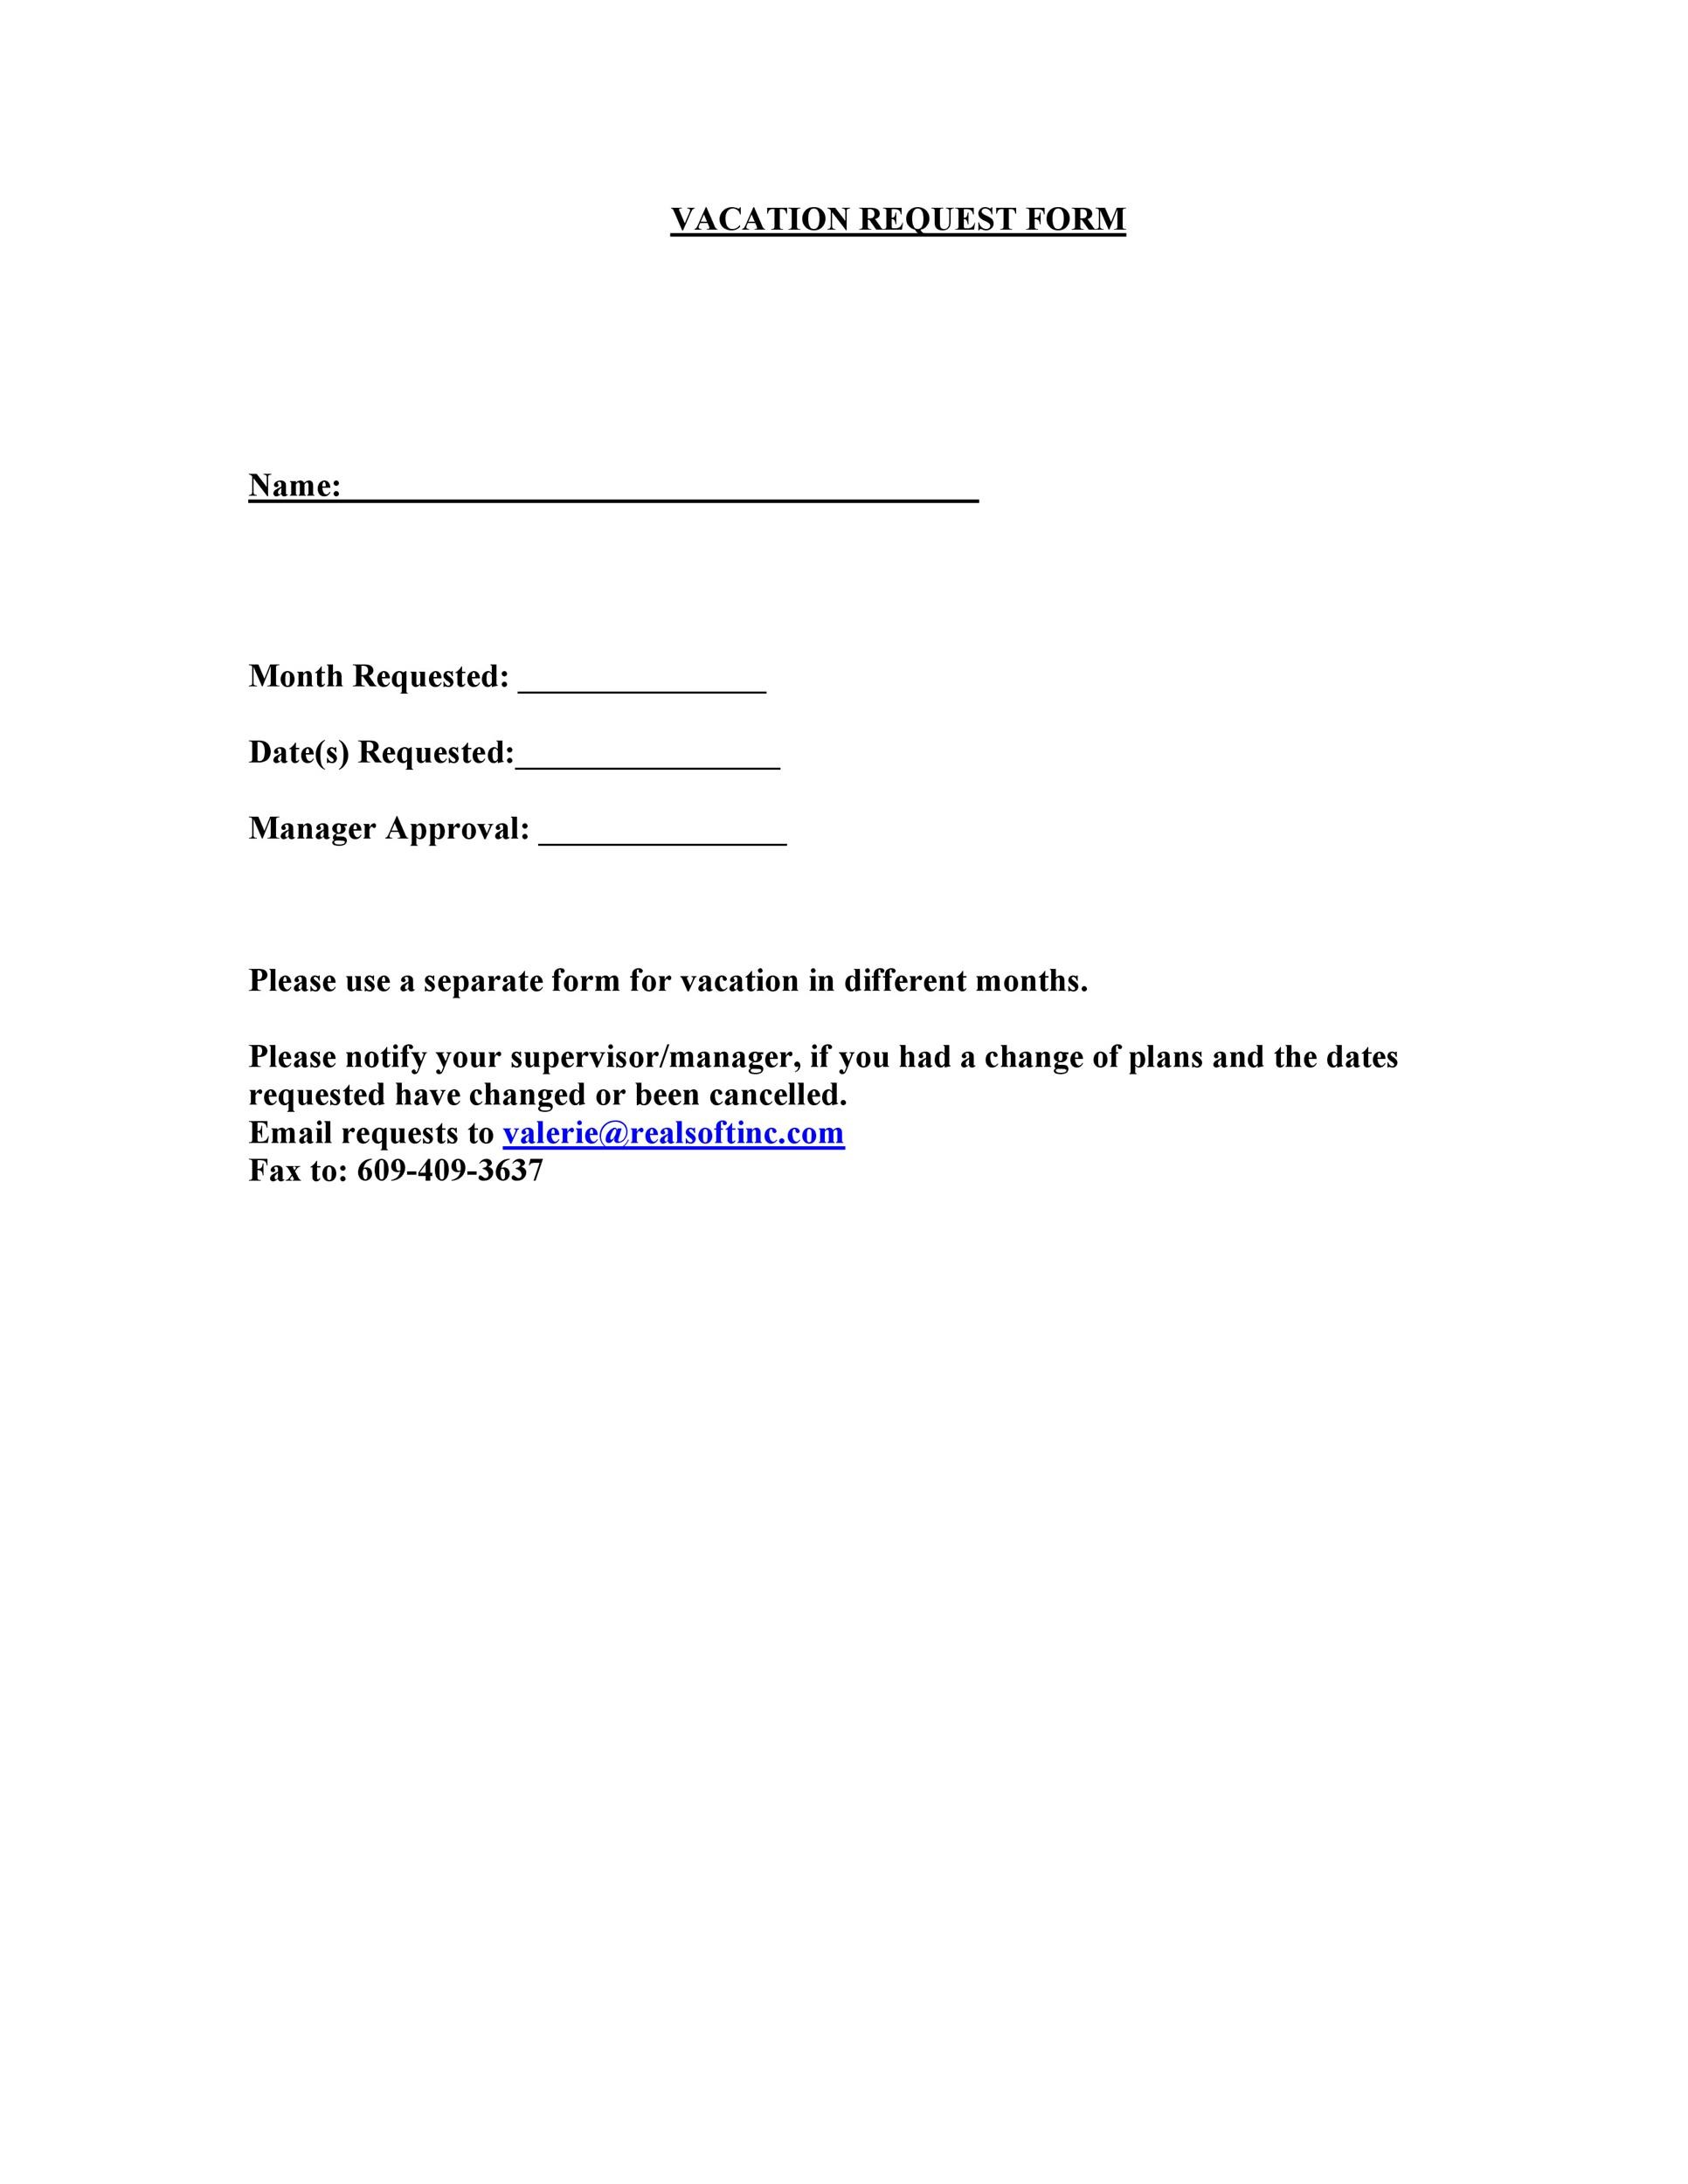 printable-vacation-request-form